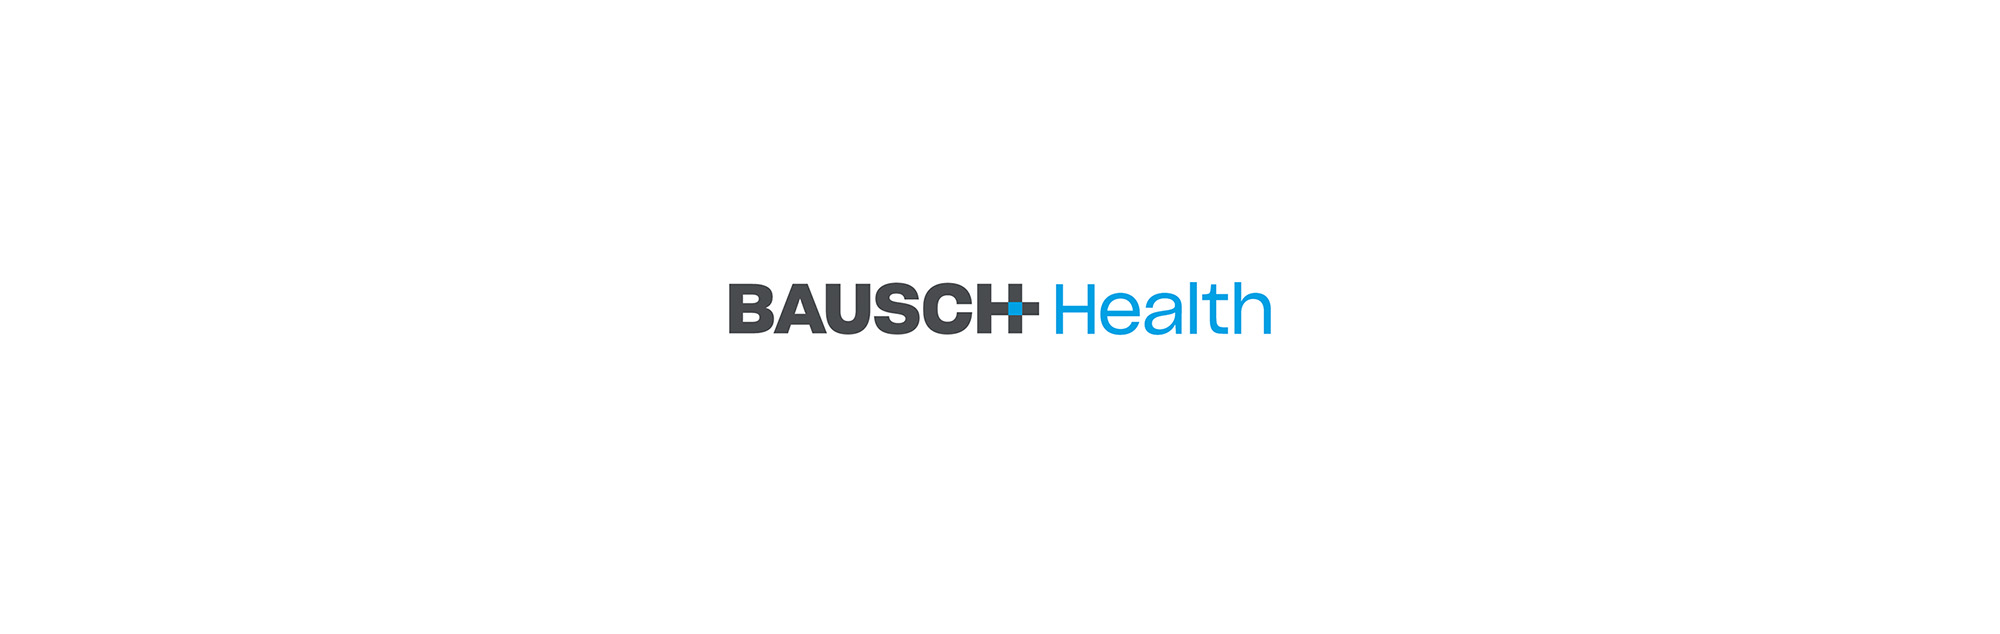 Bausch Health Companies Inc. is a global company whose mission is to improve people&#8217;s lives with our health care products. Bausch Health manufactures and markets a range of pharmaceutical, medical device and over-the-counter products, primarily in the therapeutic areas of eye health, gastroenterology and dermatology.